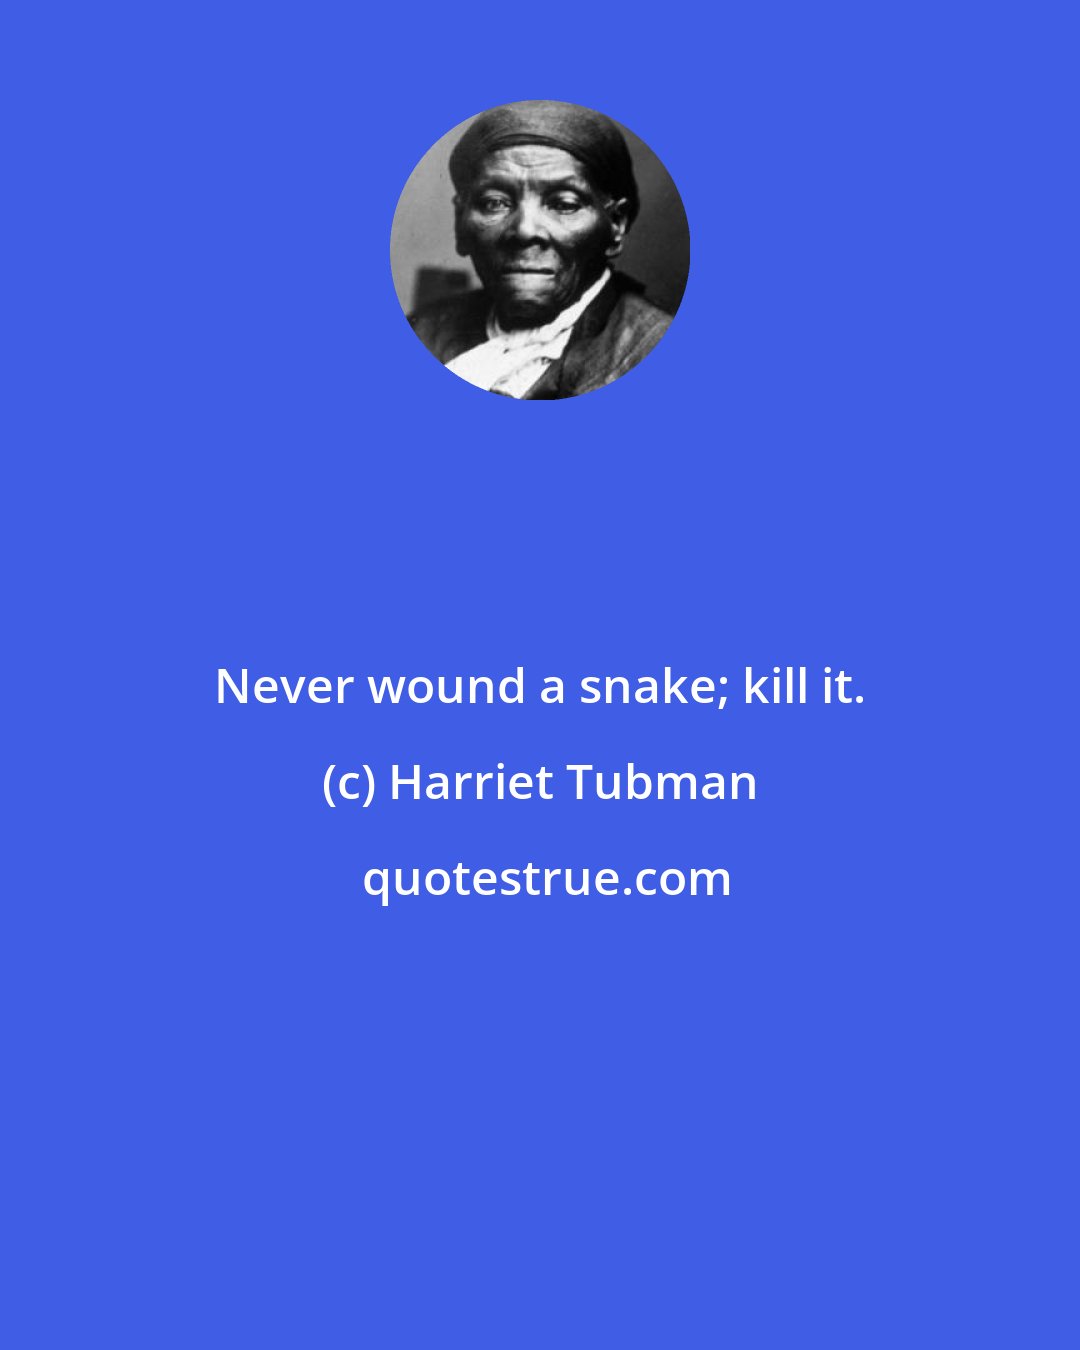 Harriet Tubman: Never wound a snake; kill it.